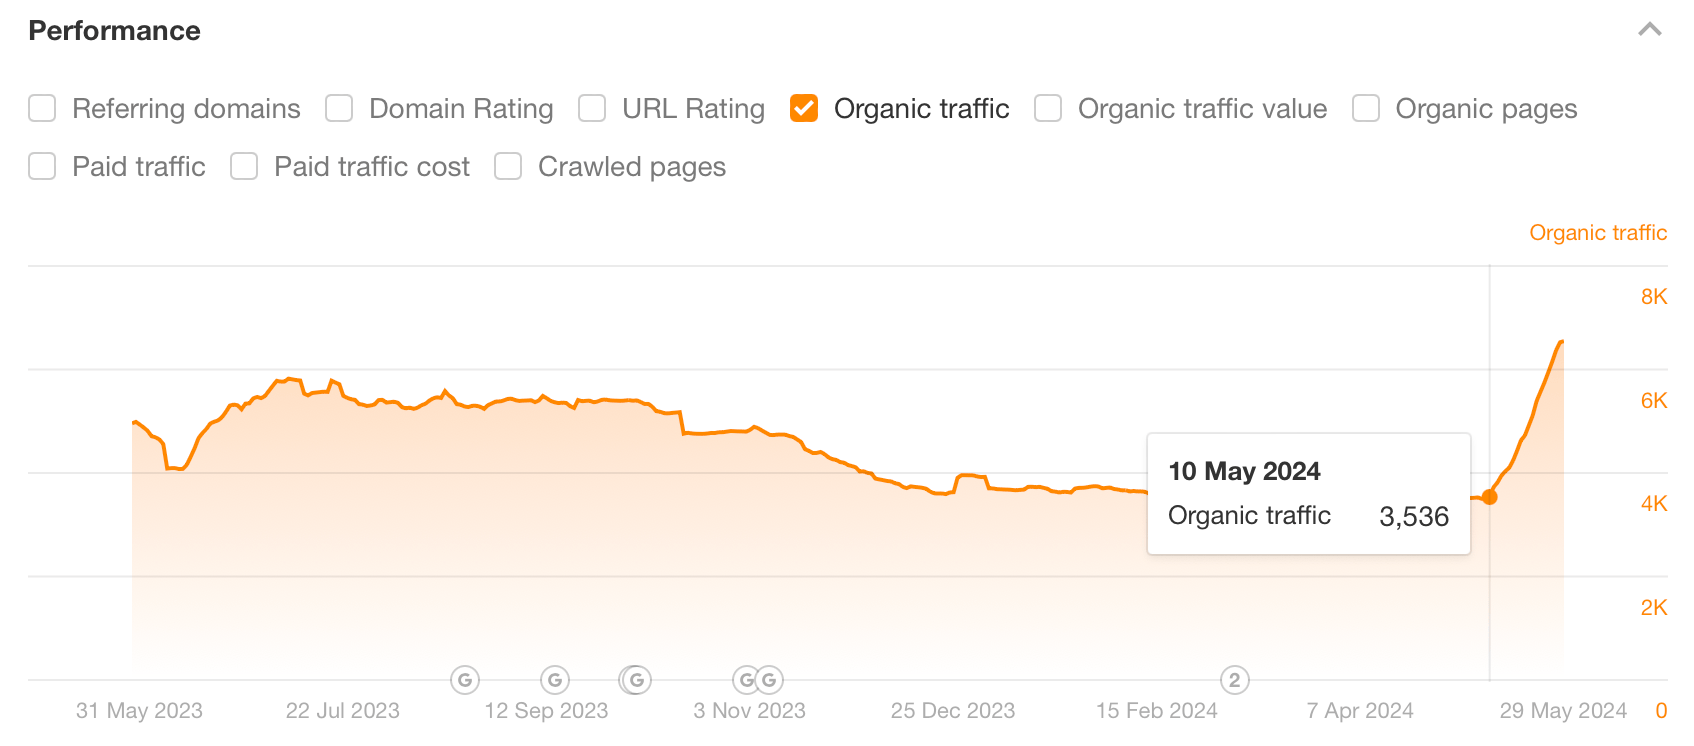 Example of a content update and the impact on organic traffic, via Ahrefs' Site Explorer